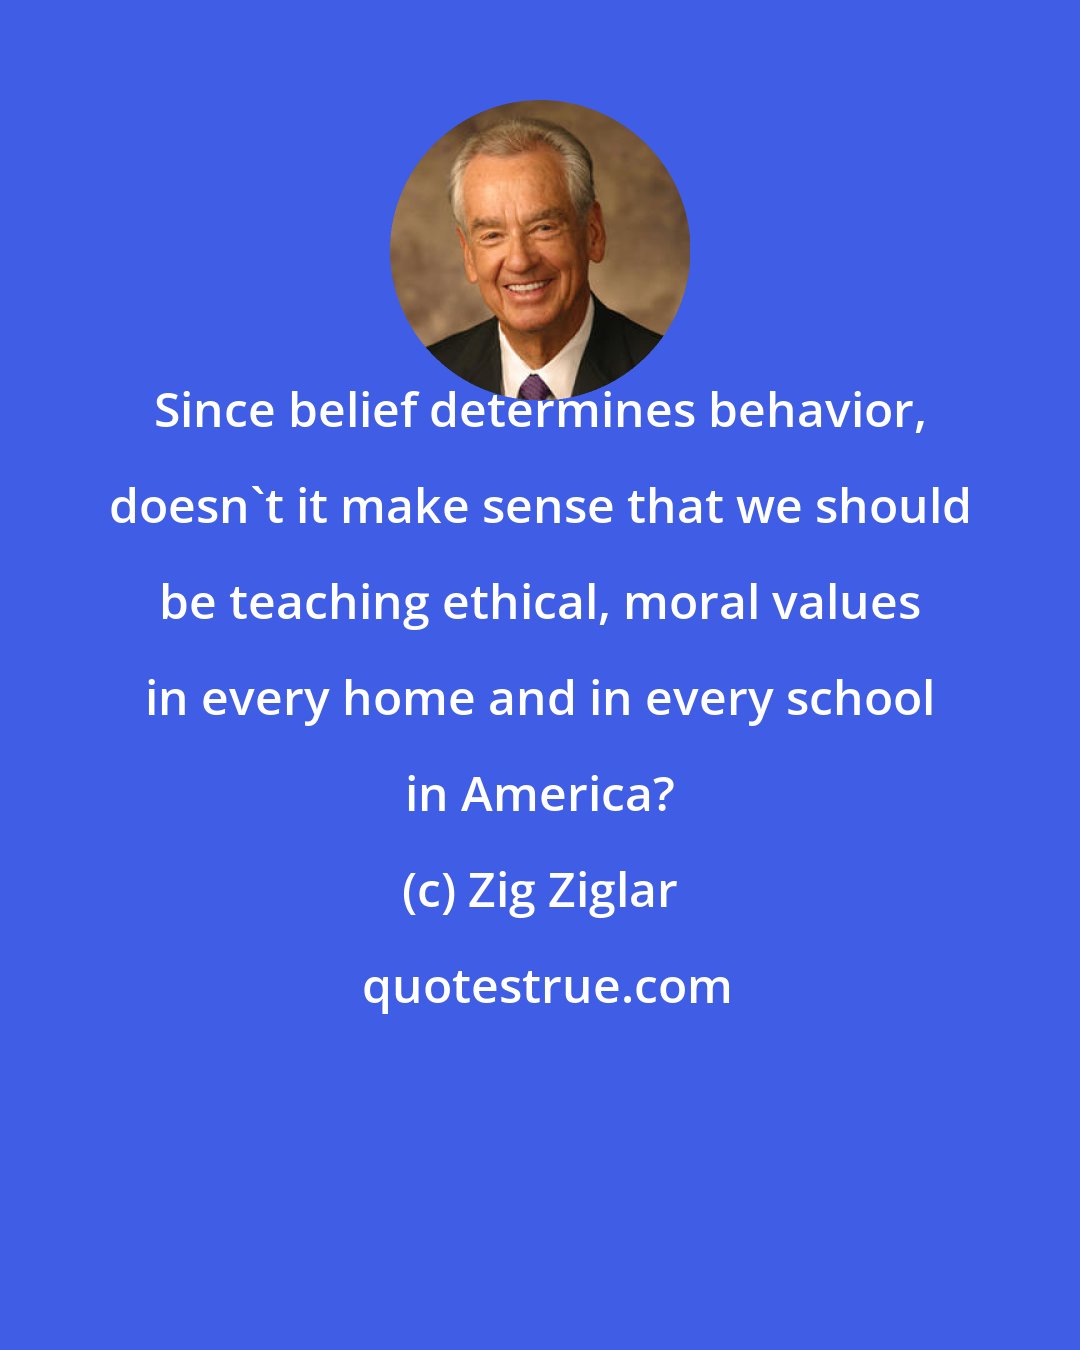 Zig Ziglar: Since belief determines behavior, doesn't it make sense that we should be teaching ethical, moral values in every home and in every school in America?